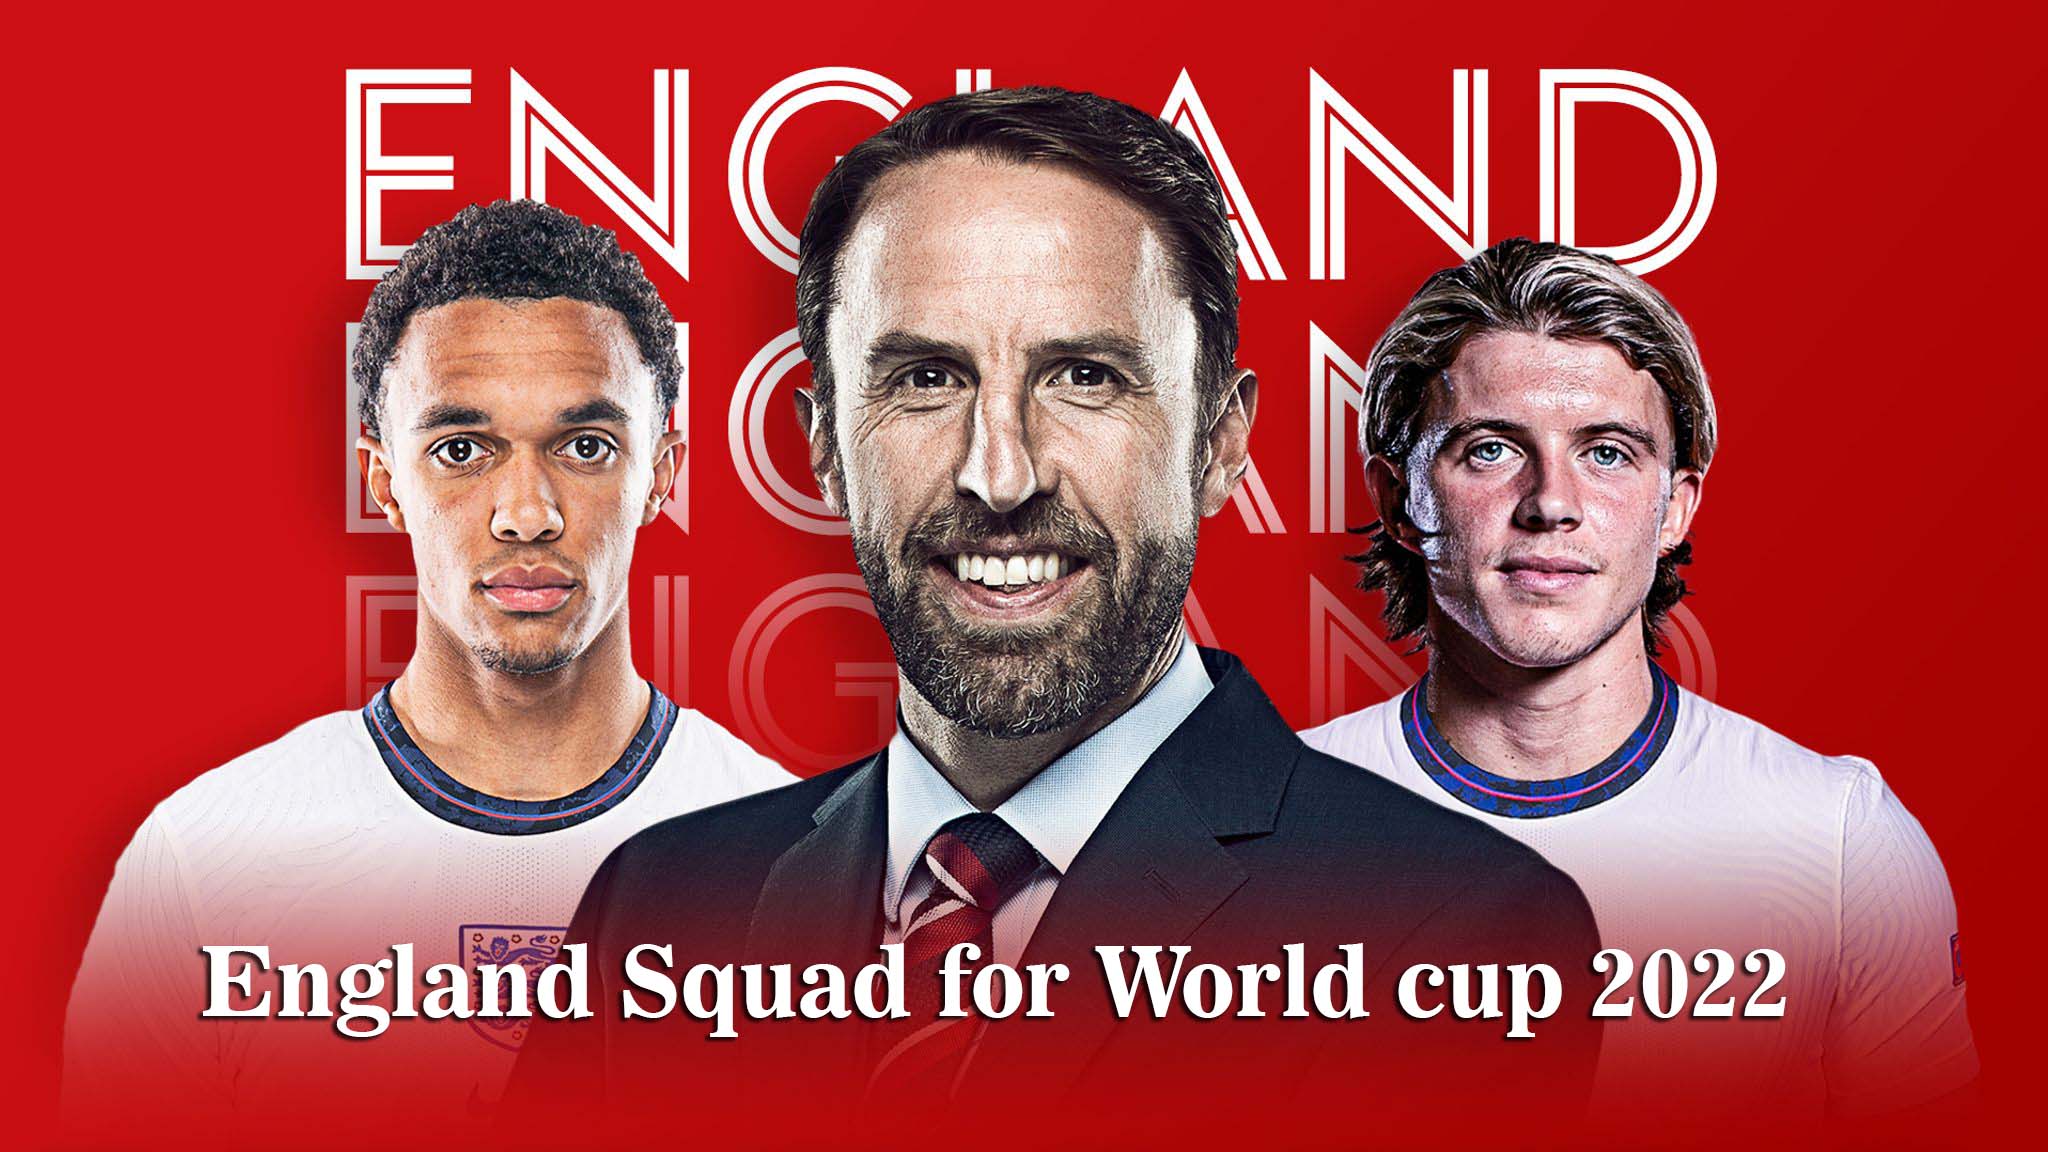 England world cup squad 2022